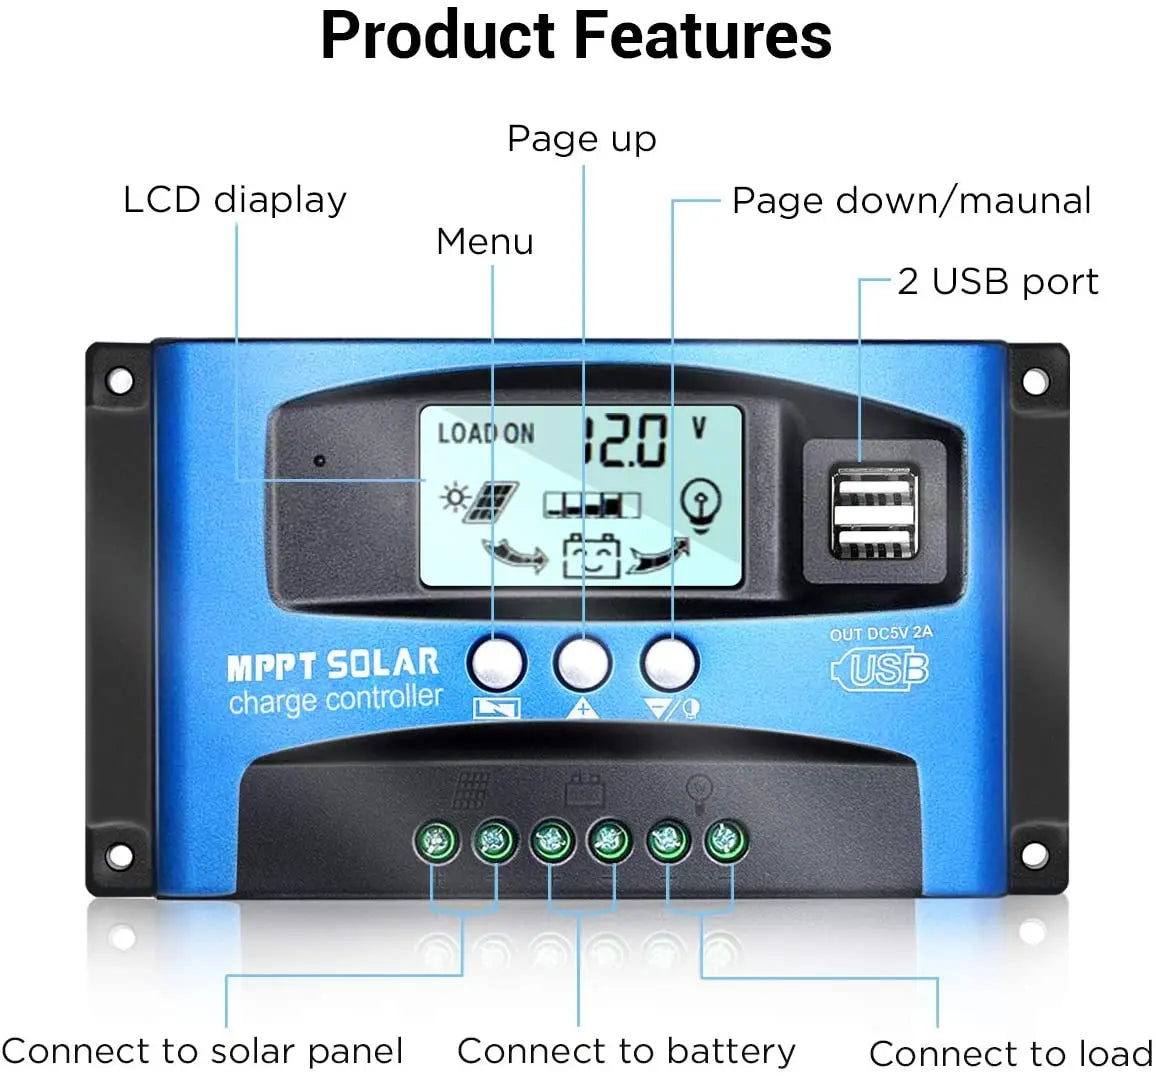 Charge controller with LCD display, USB ports, and MPPT tech for solar panel, battery, and load connection.